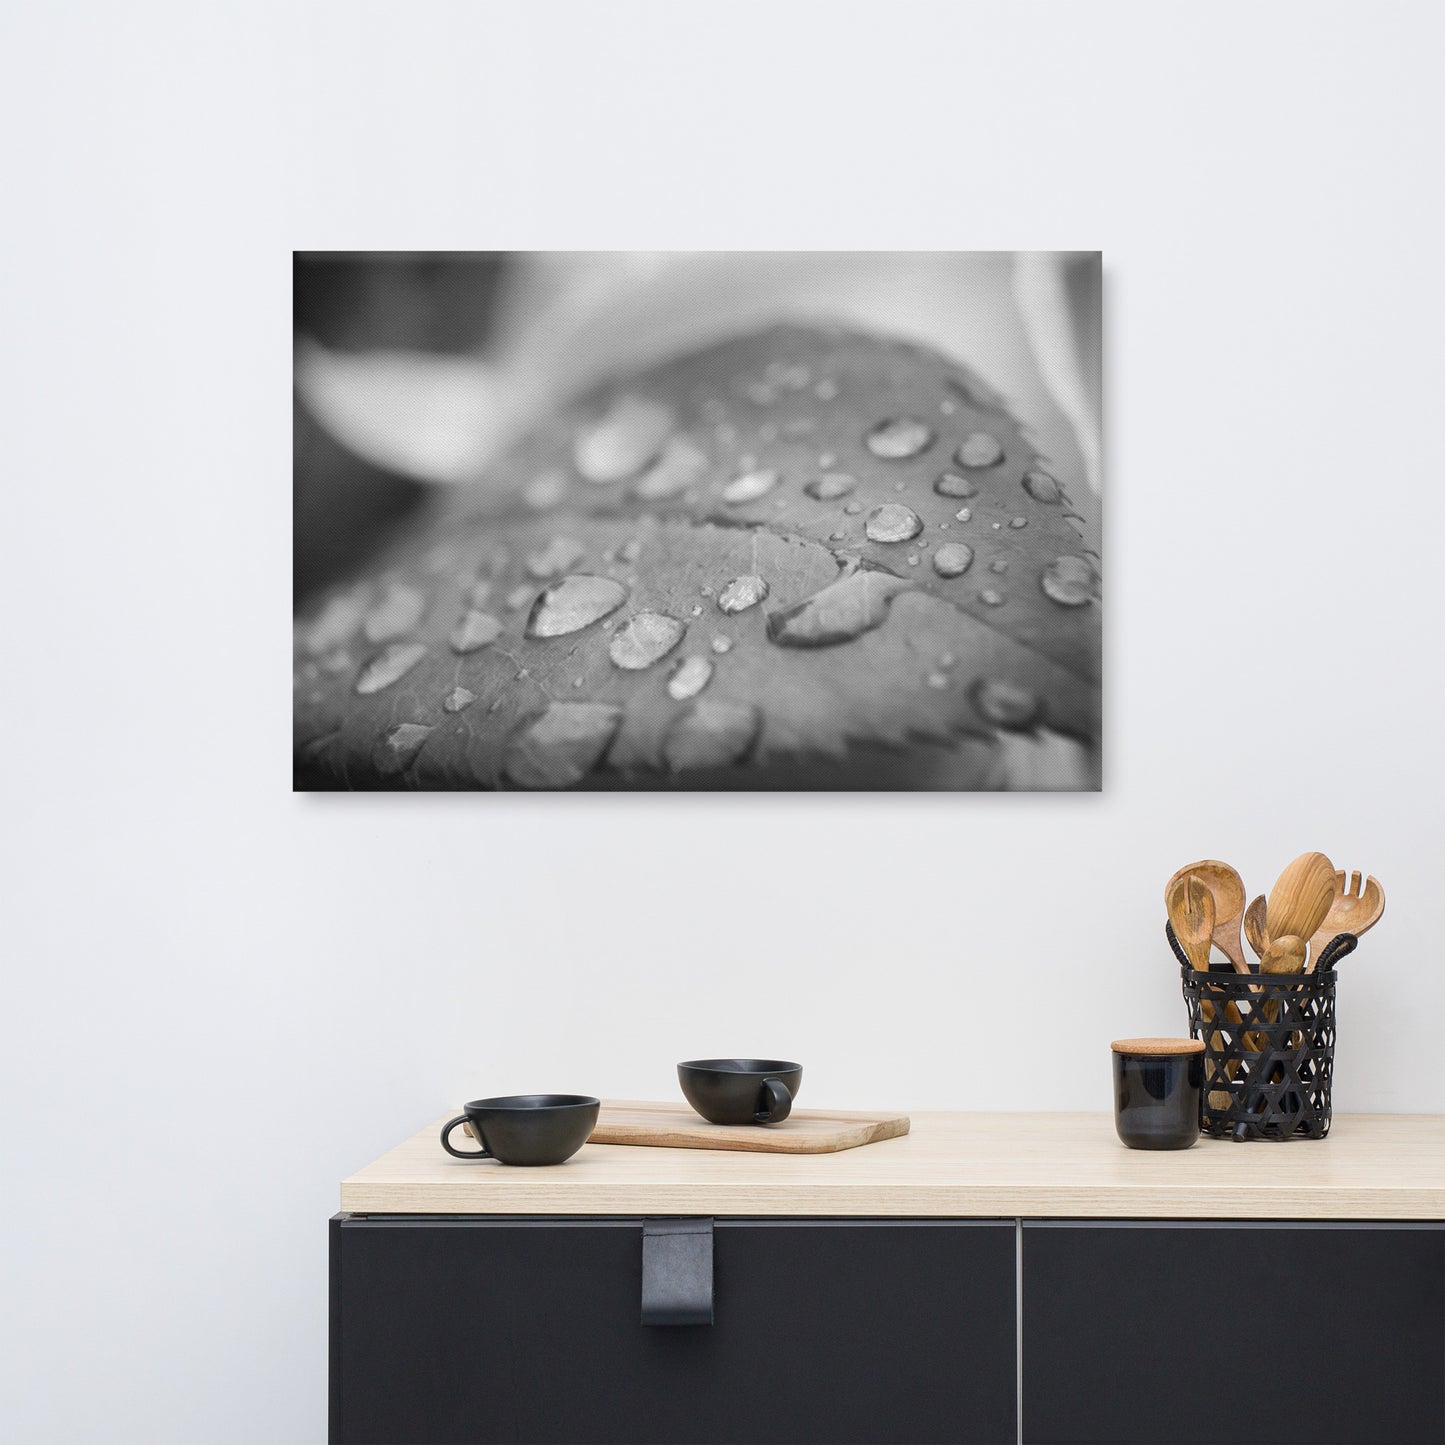 Dew on Leaf of Rose Plant Black and White Floral Nature Canvas Wall Art Prints